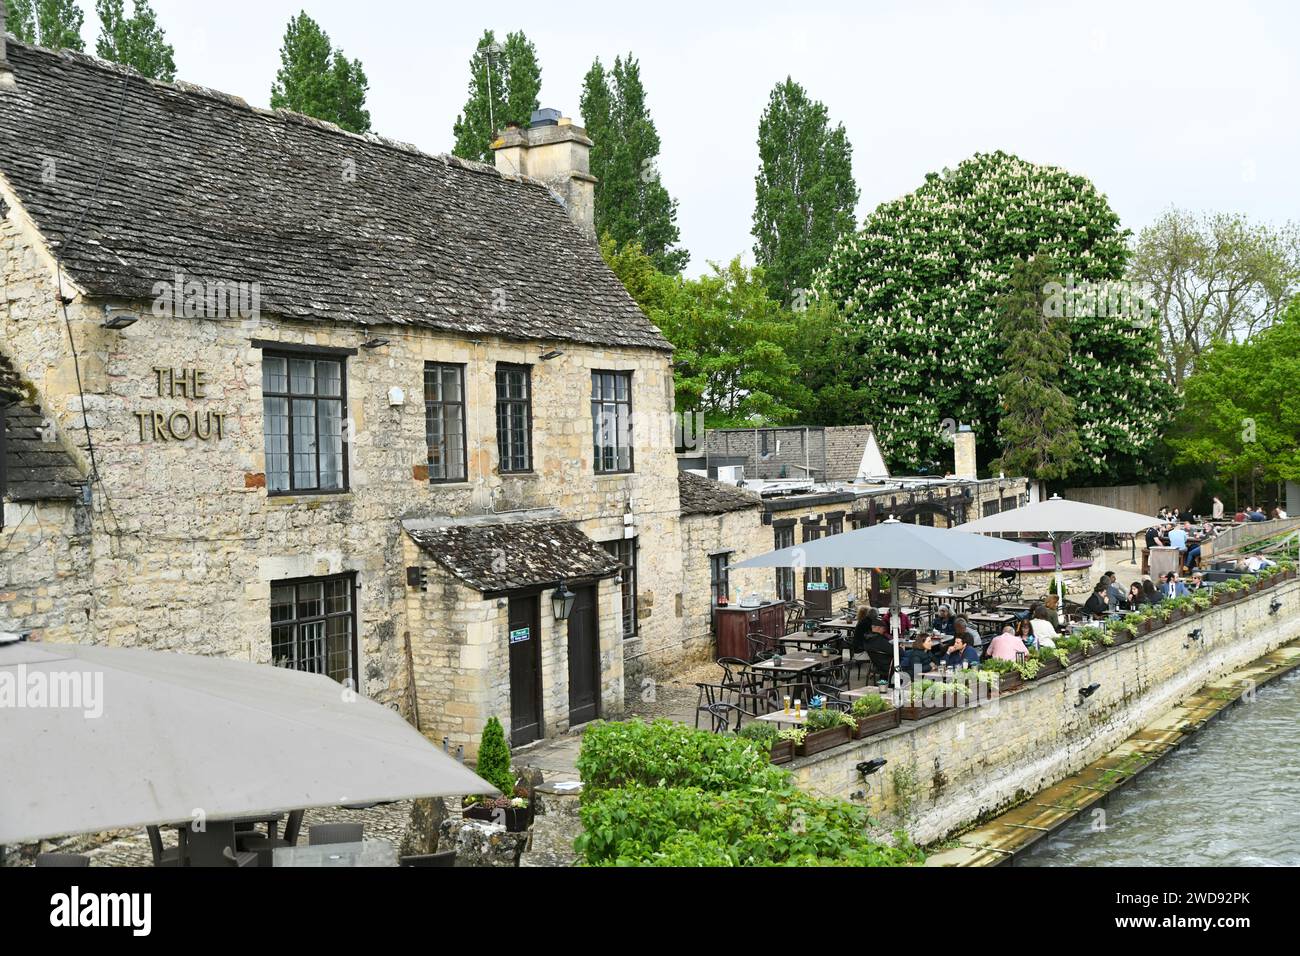 The Trout Inn, Oxford, Angleterre Banque D'Images